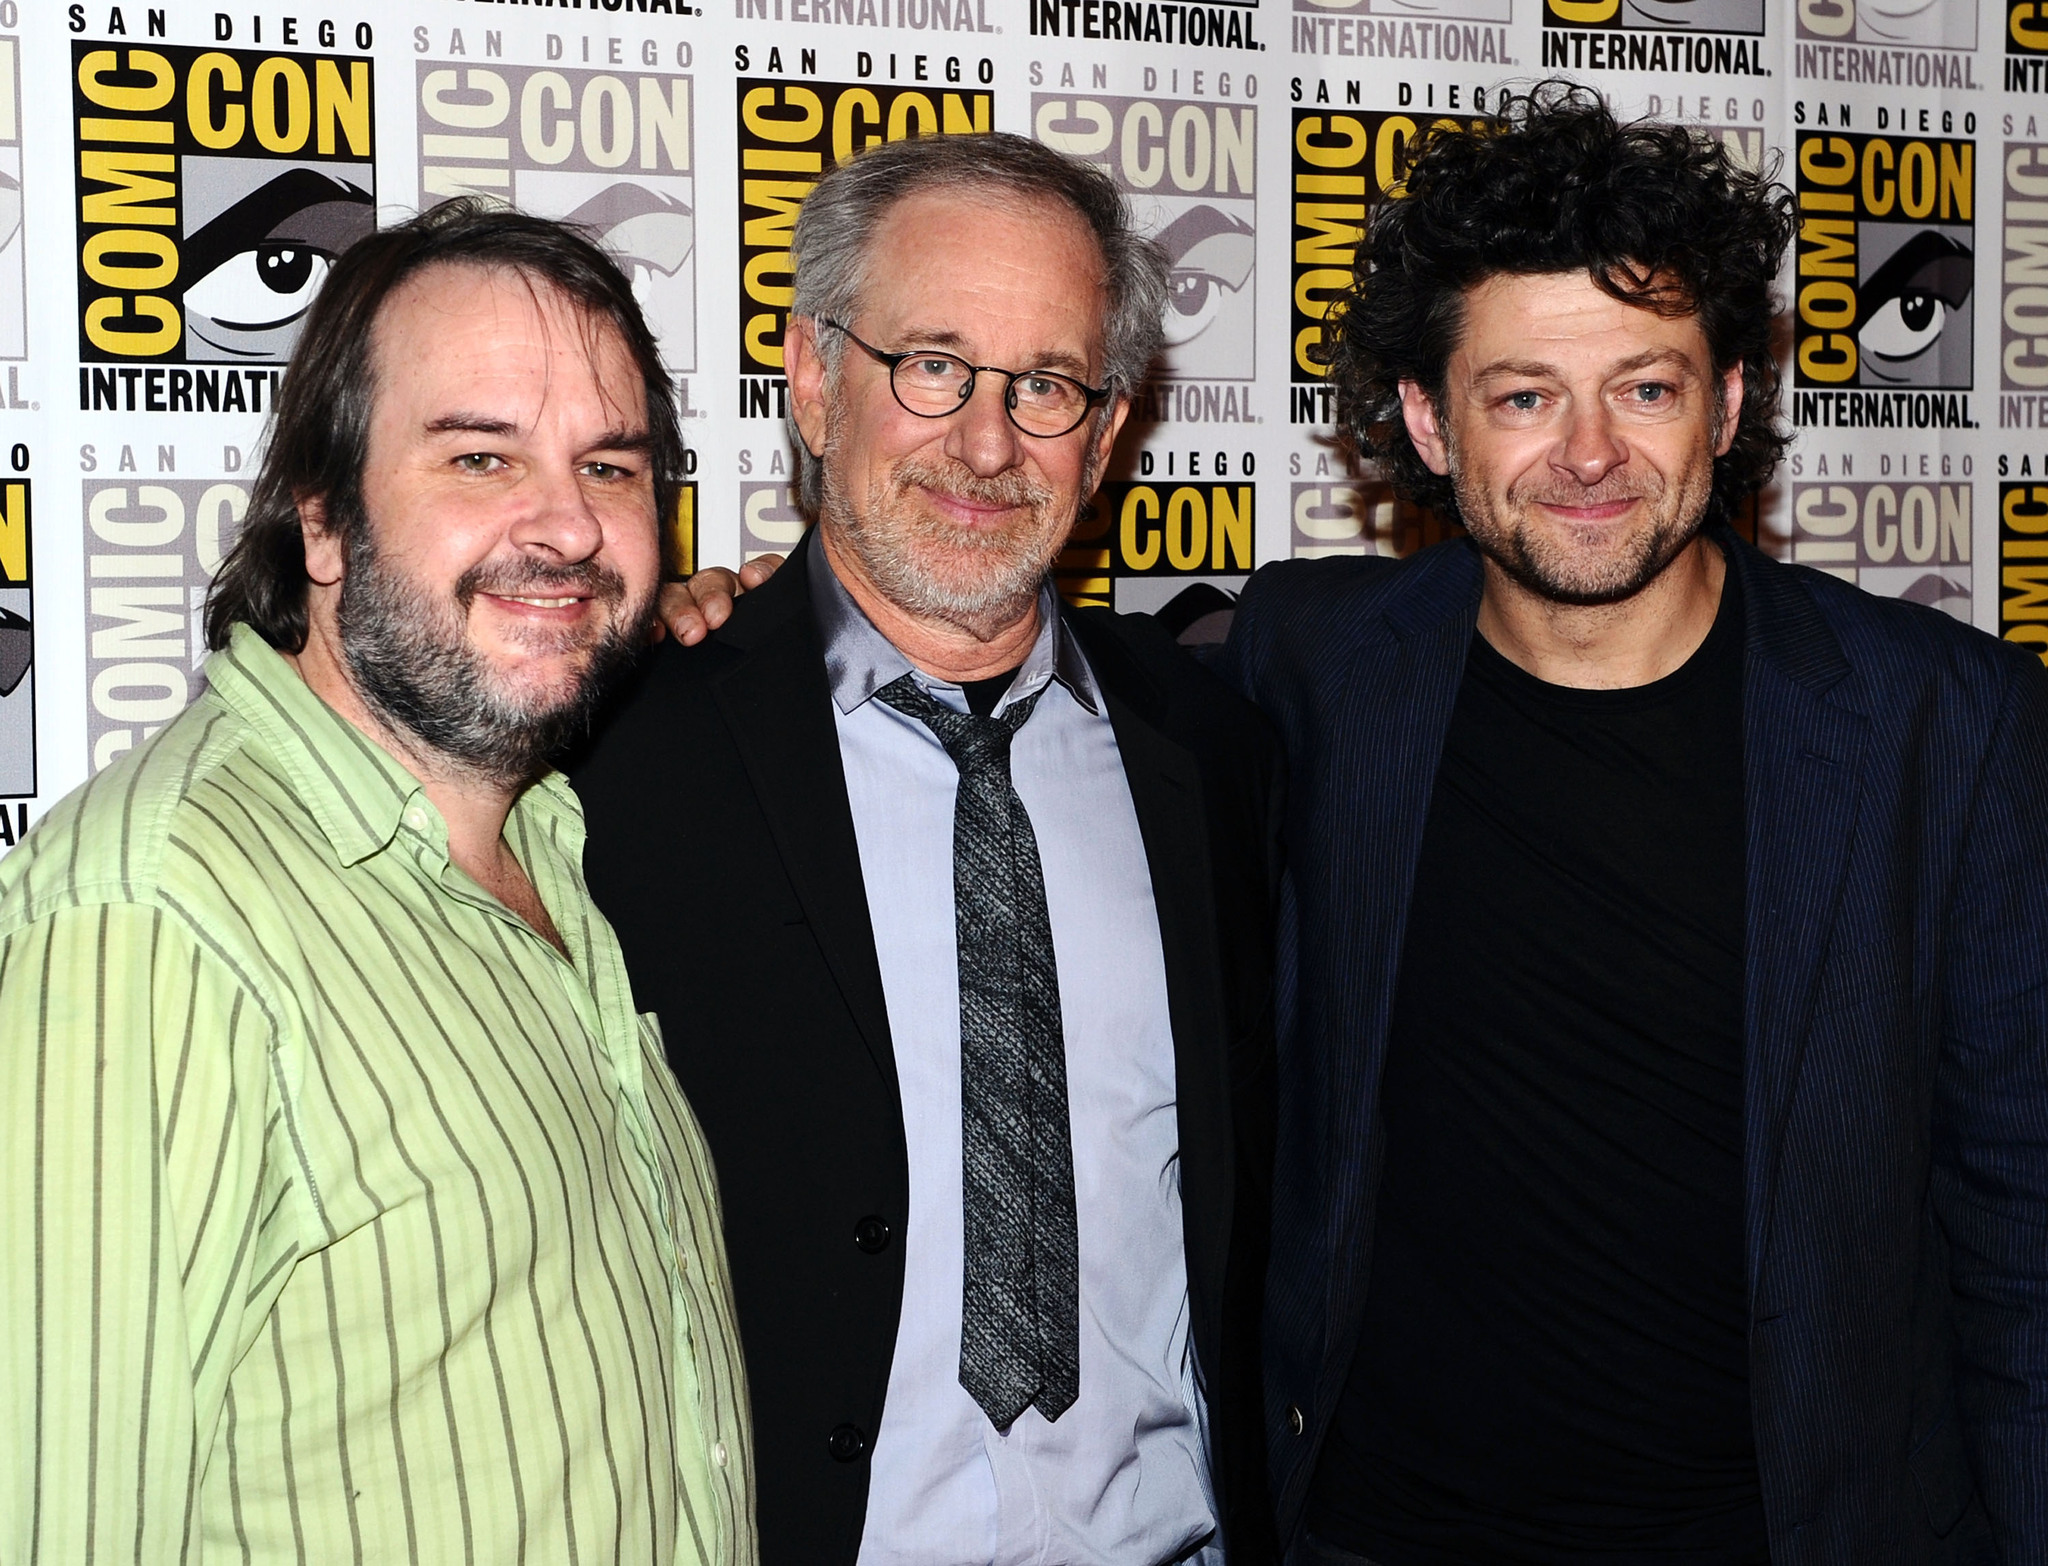 Steven Spielberg, Peter Jackson and Andy Serkis